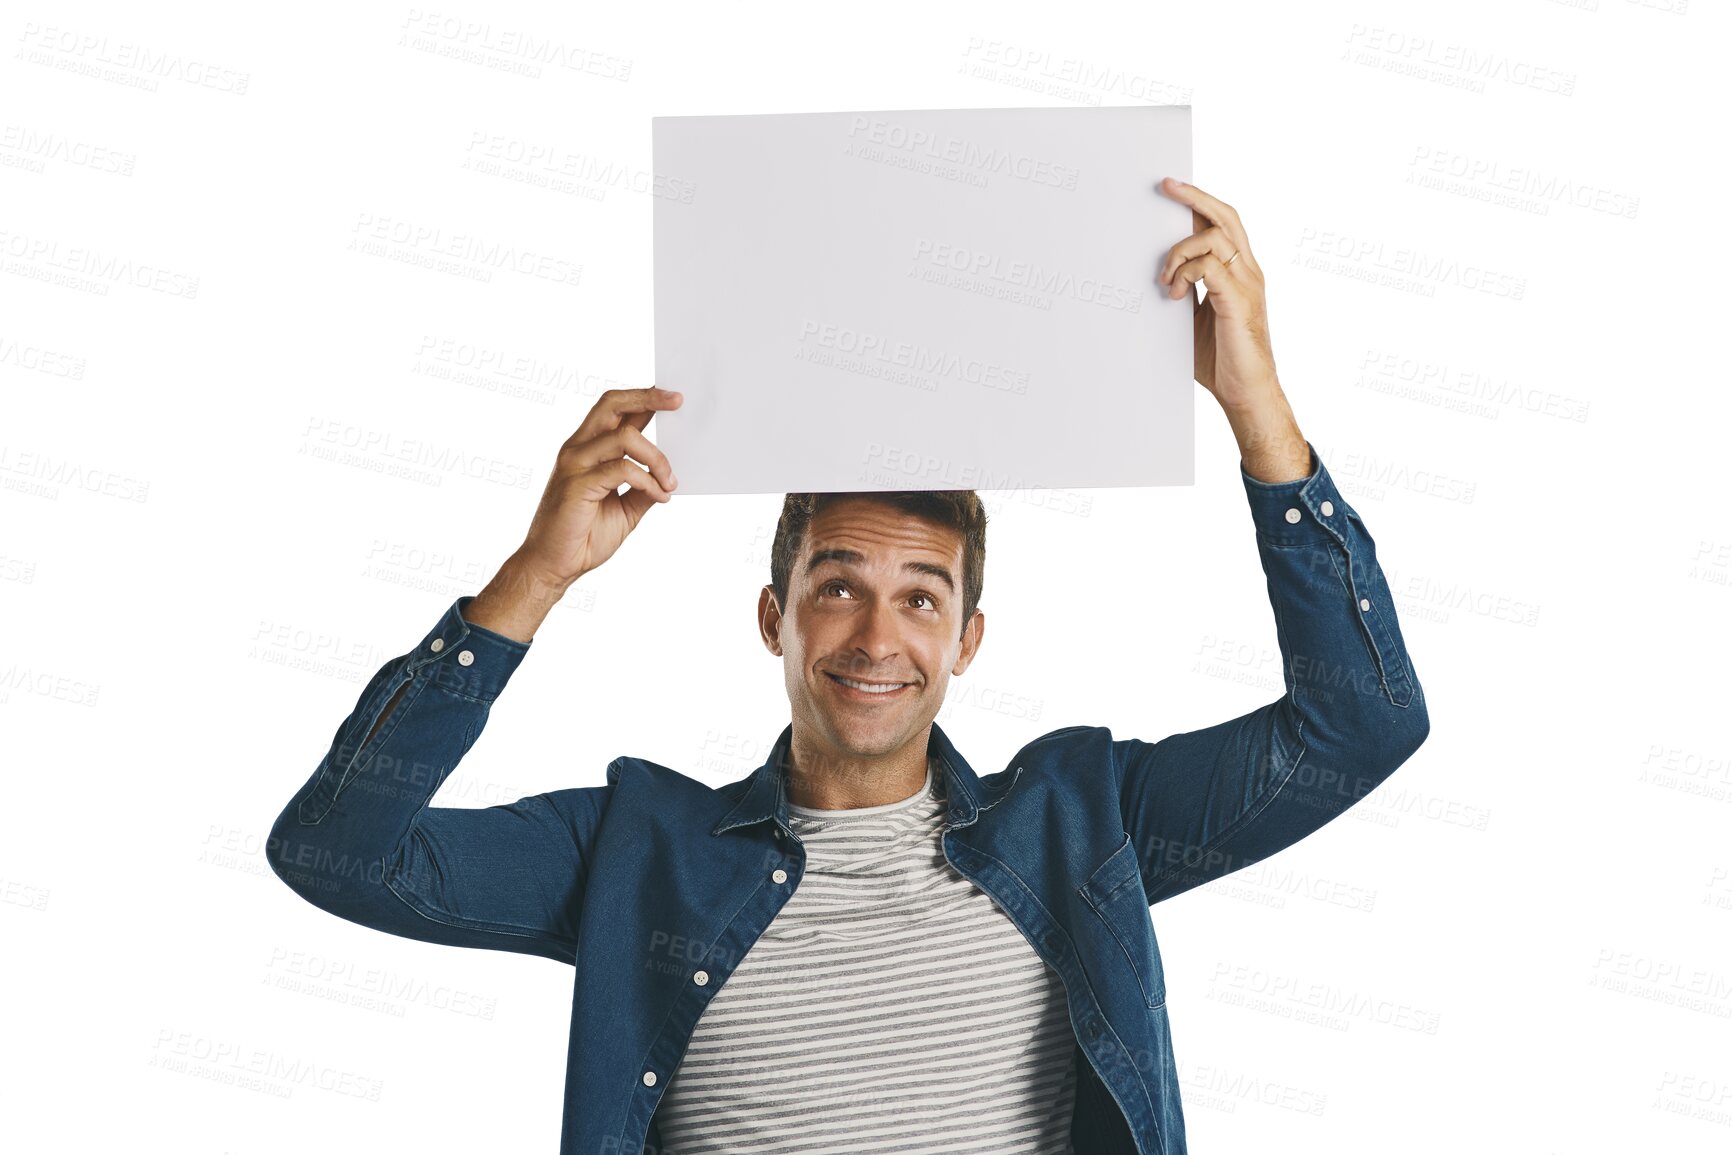 Buy stock photo Smile, announcement and man with blank poster on deal promotion isolated on transparent png background. News, presentation and happy person showing offer on paper, sign or billboard with mockup space